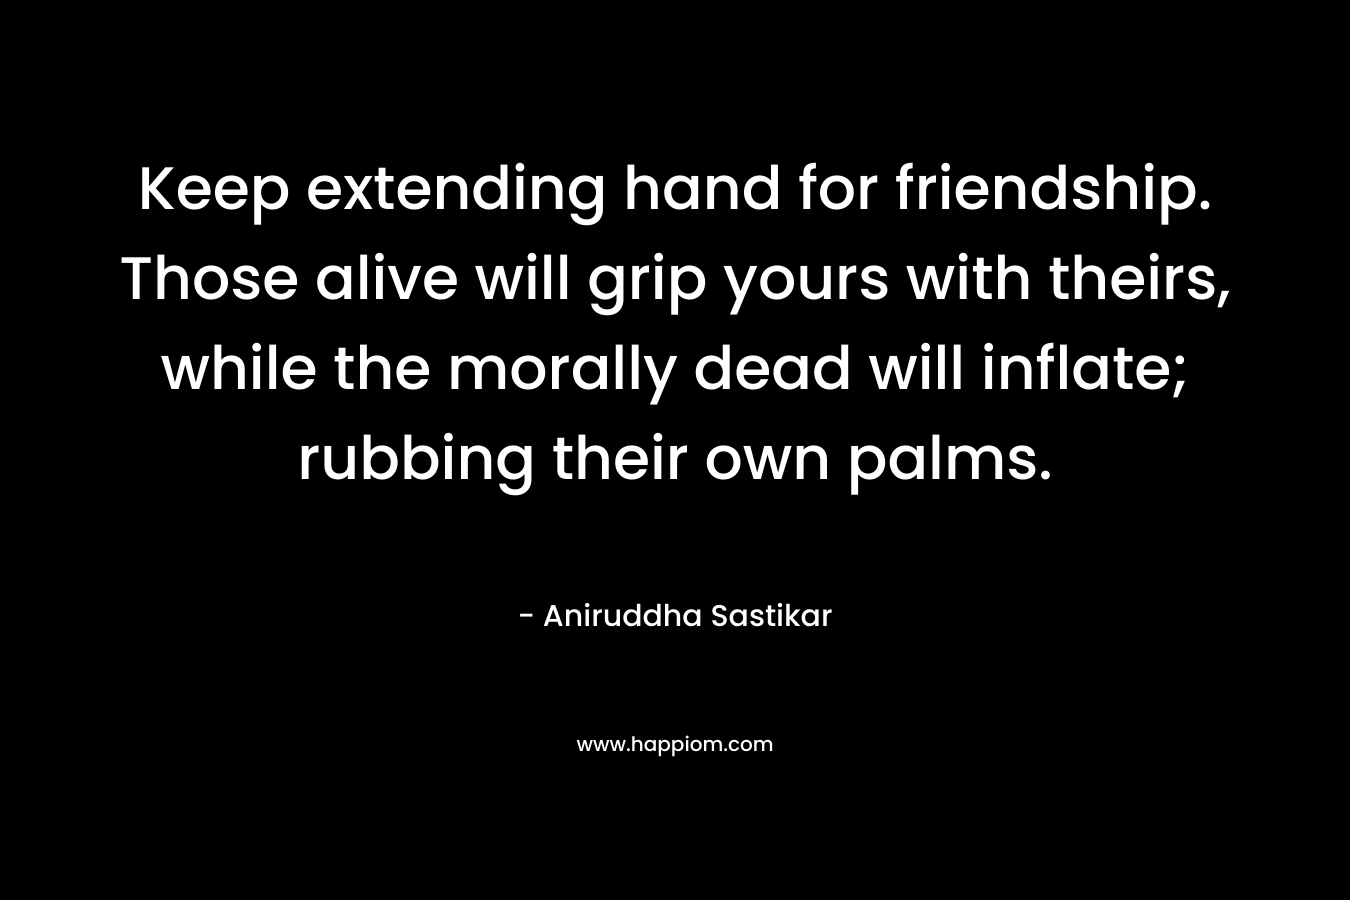 Keep extending hand for friendship. Those alive will grip yours with theirs, while the morally dead will inflate; rubbing their own palms. – Aniruddha Sastikar